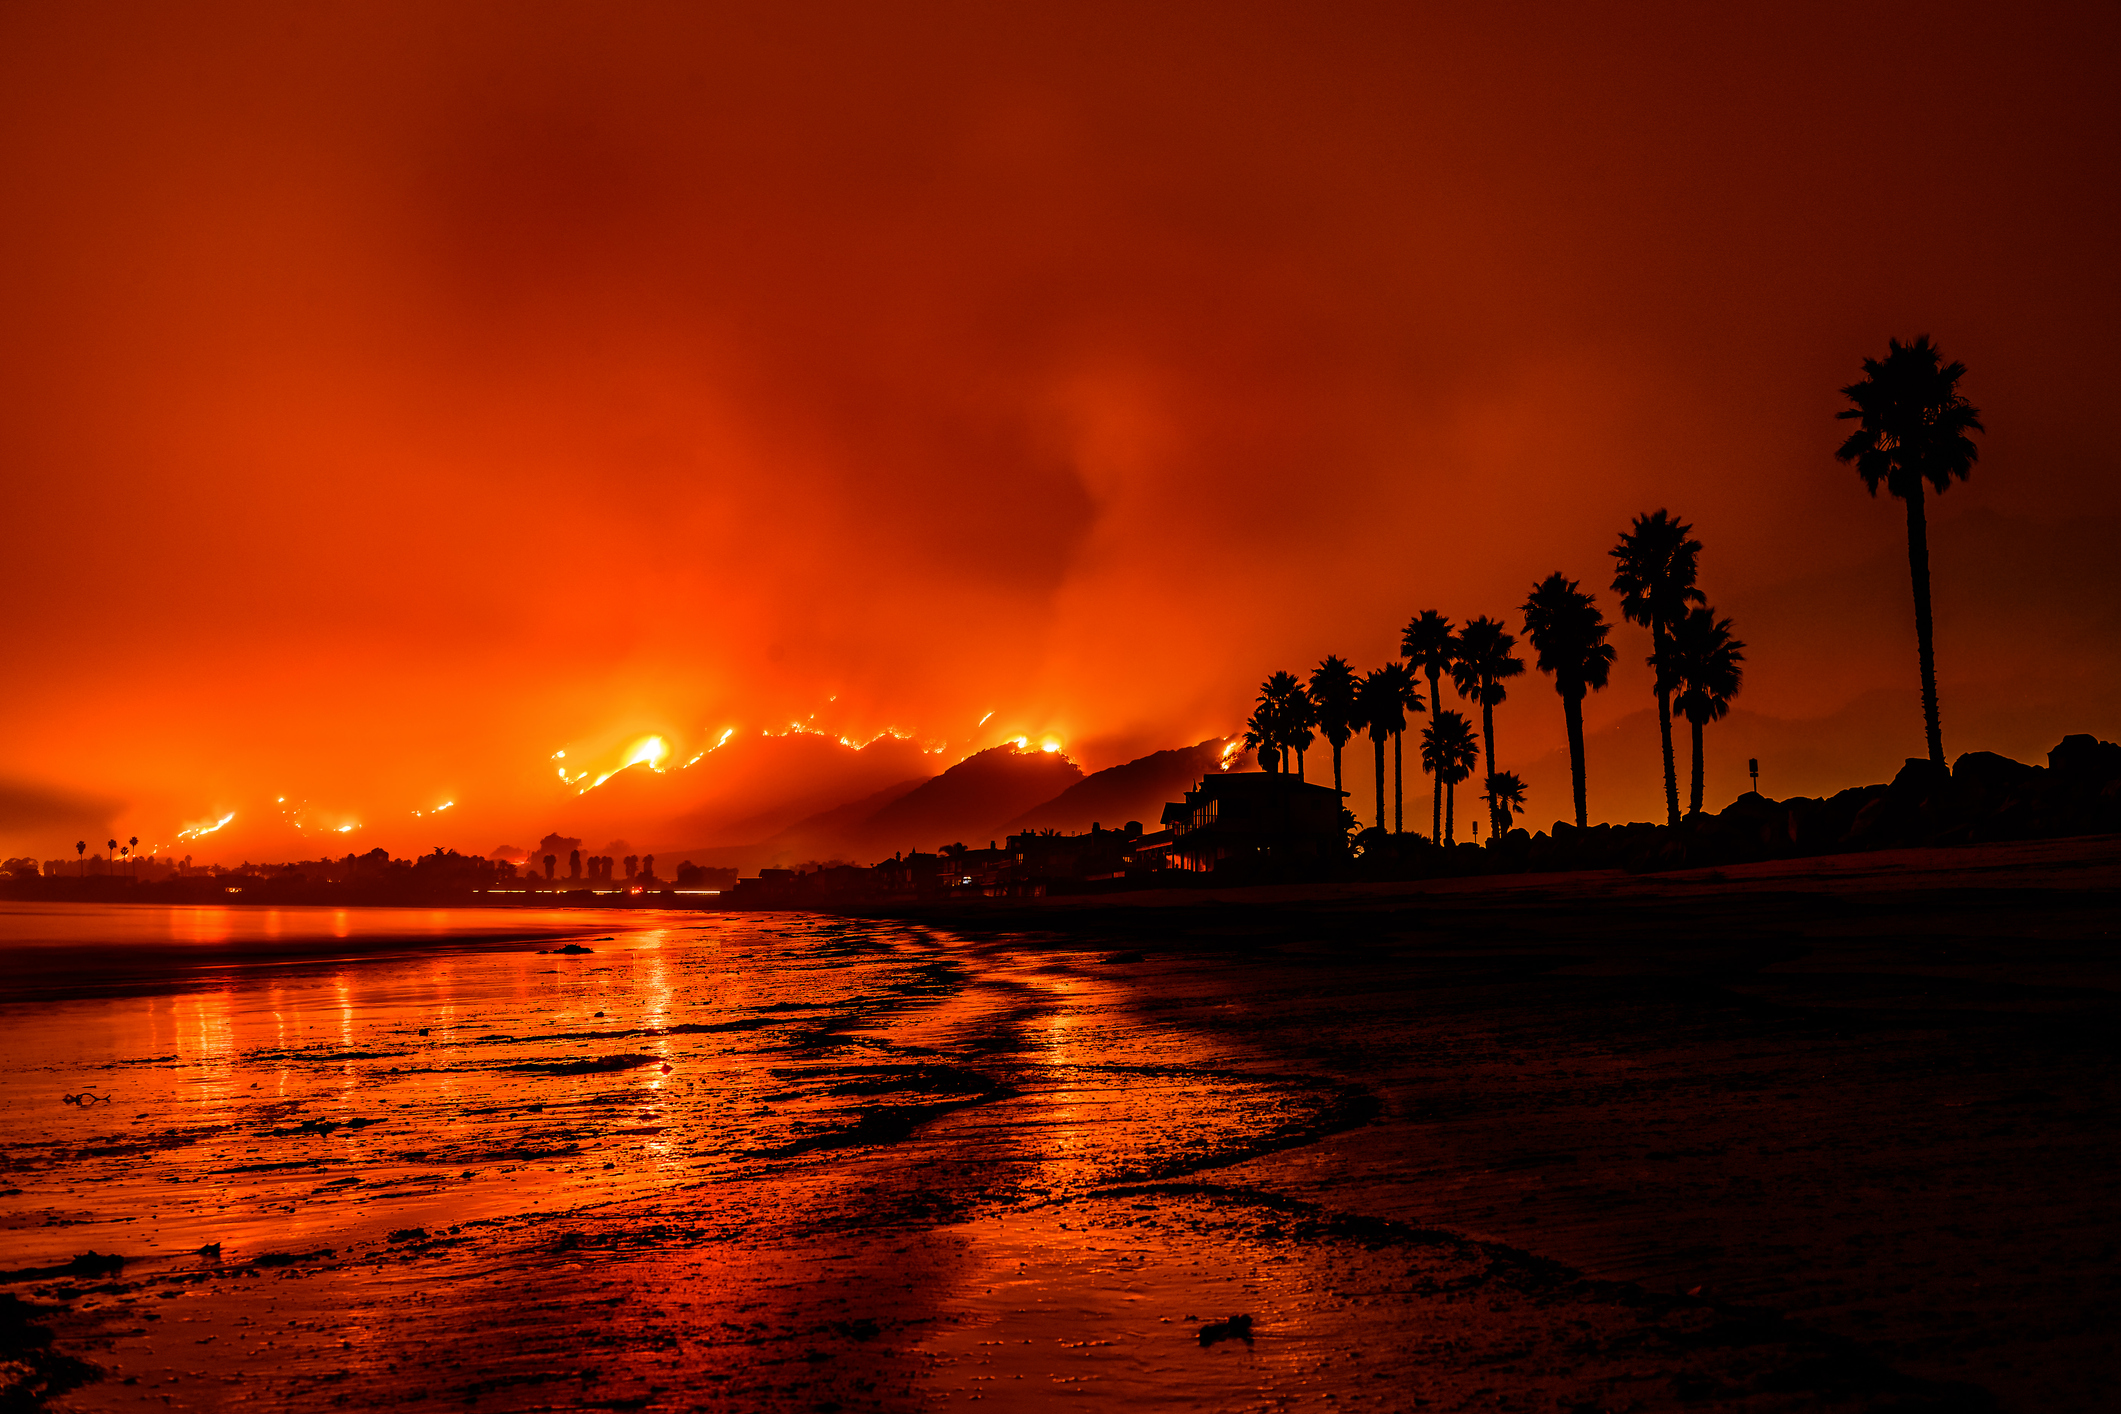 Water washes up on the shore at the beach while a fire rages in the background.